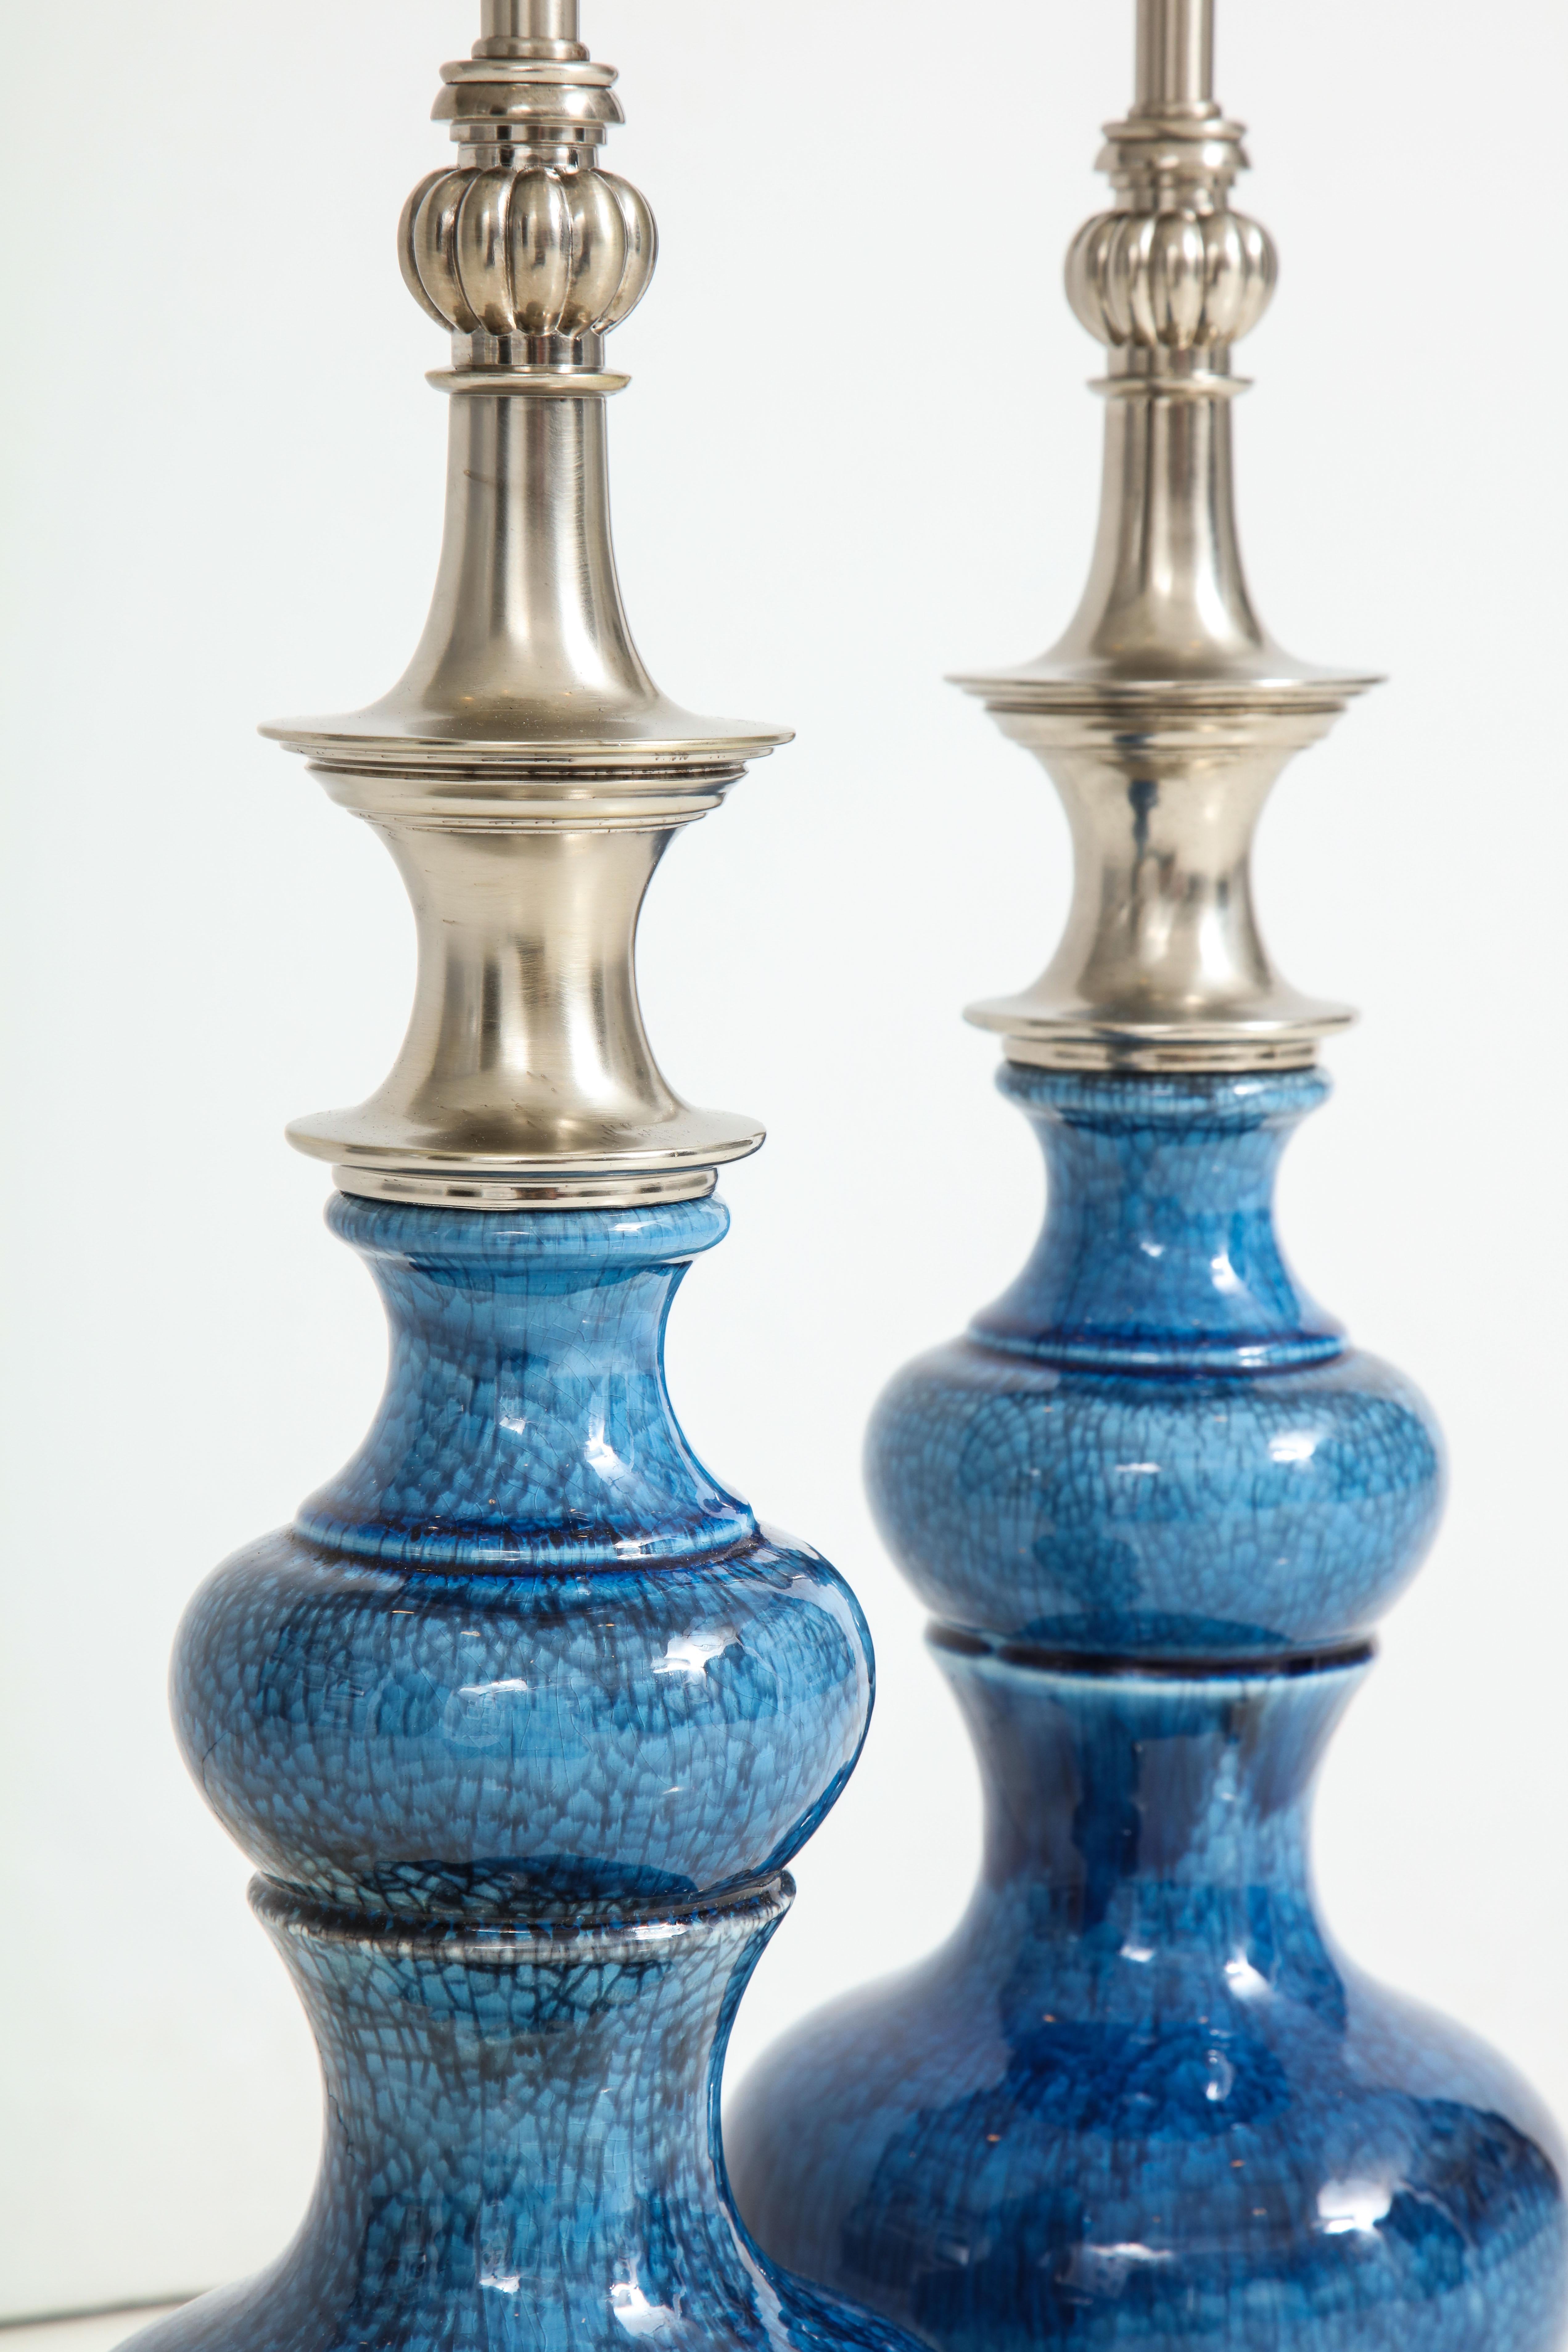 Mid-20th Century Pair of Stiffel Blue Crackle Glazed Lamps